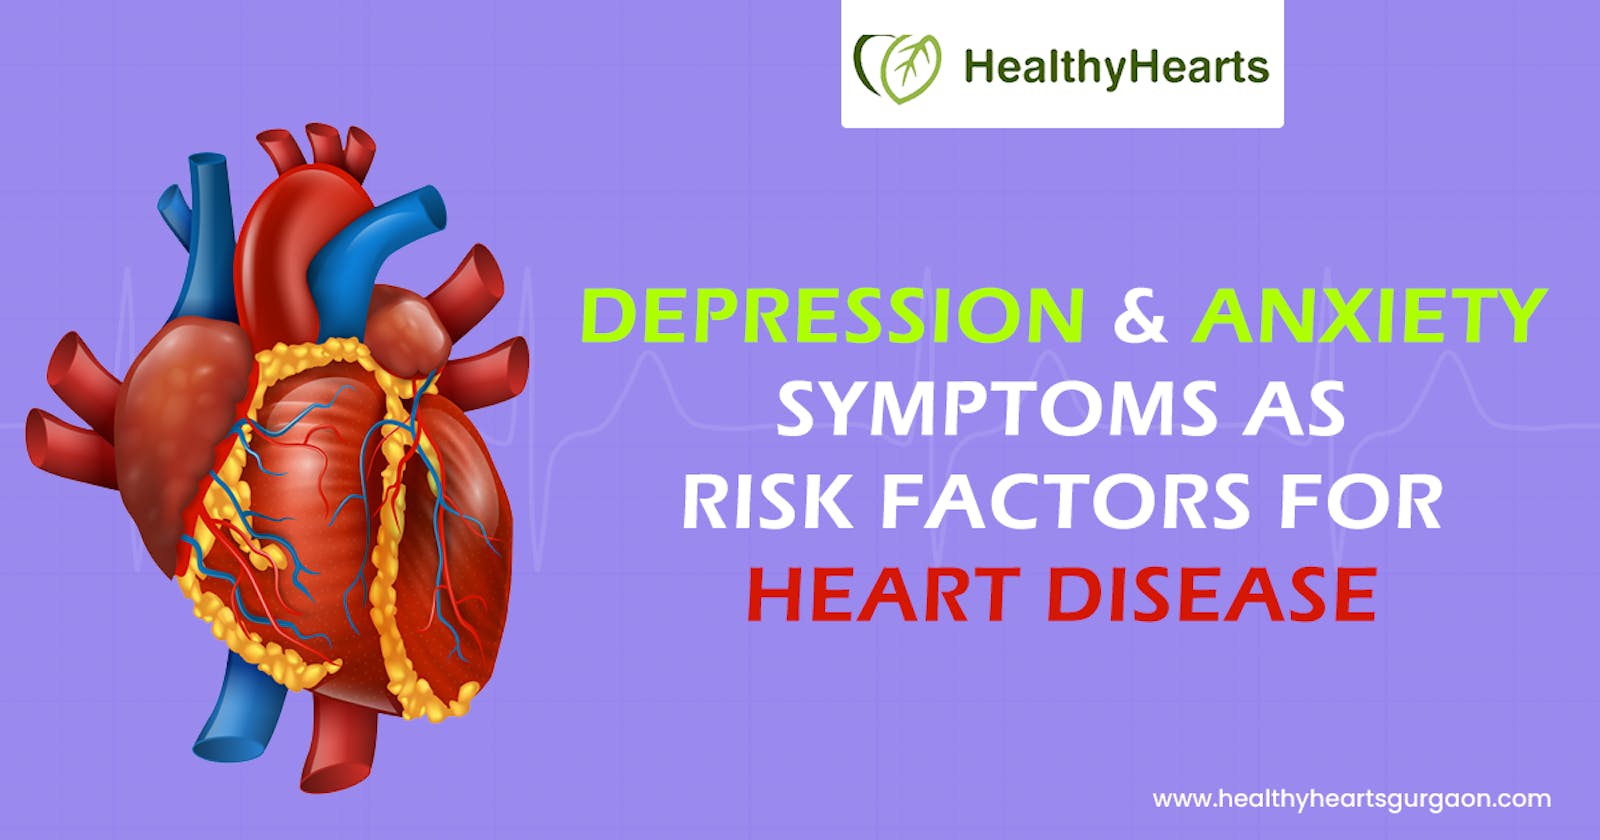 Depression and anxiety symptoms as risk factors for heart disease